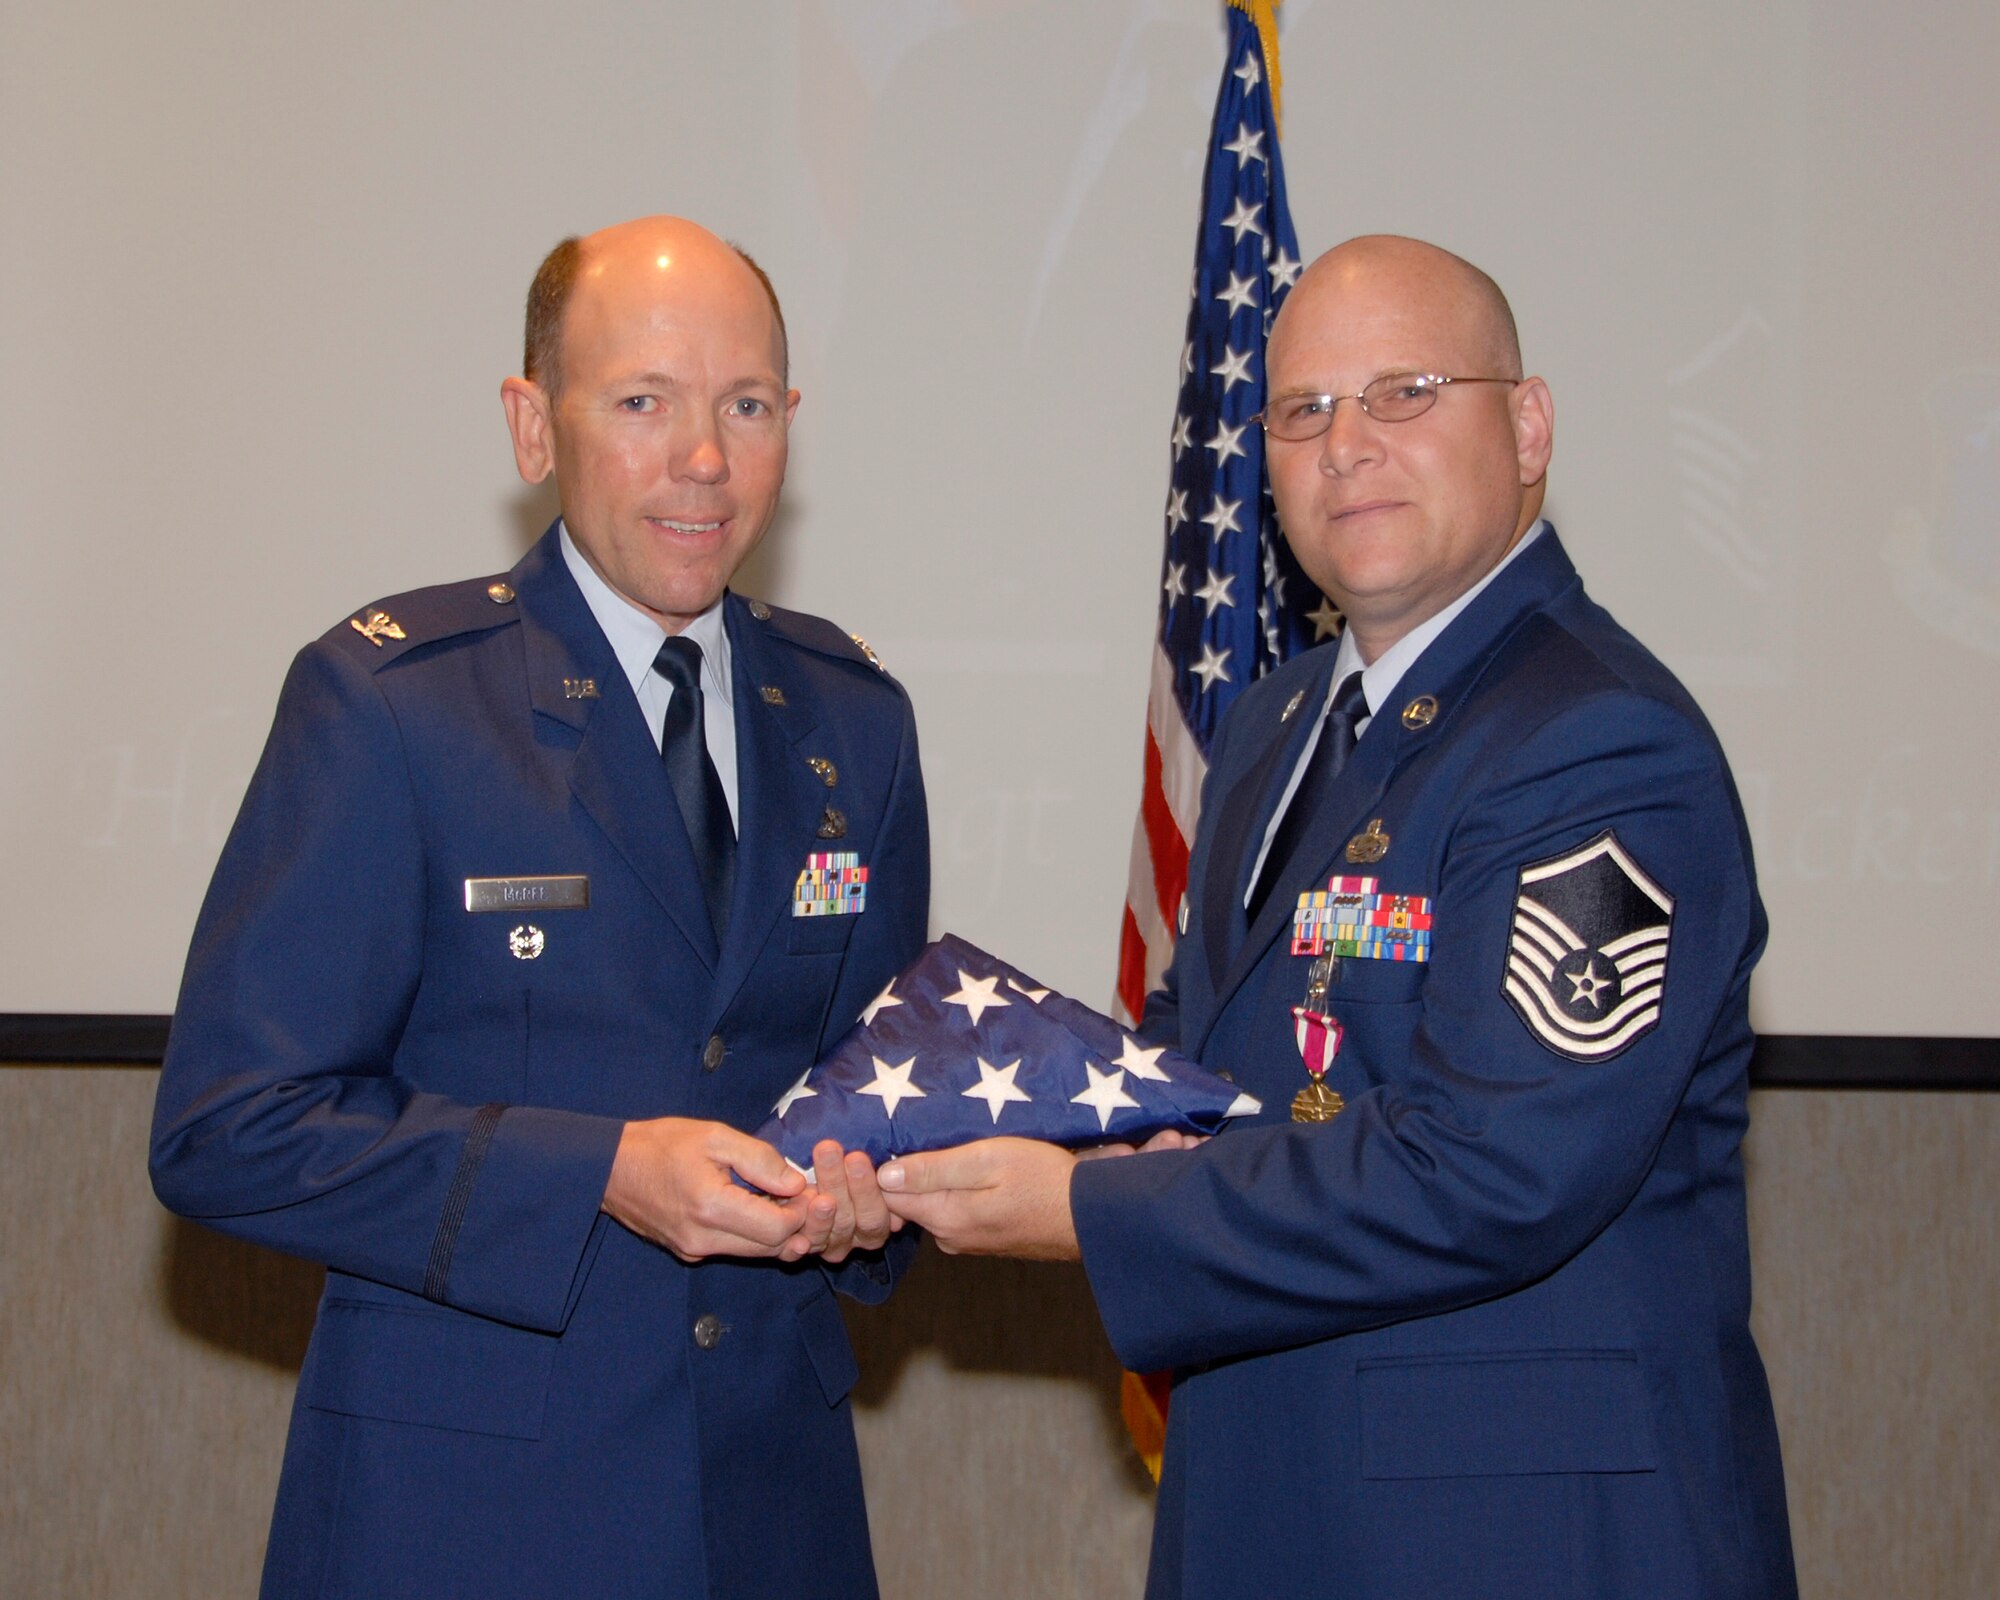 McGHEE TYSON ANGB, Tenn. -- Master Sgt. Dwayne D. Ackerman, a physical fitness instructor with The I.G. Brown Air National Guard Training and Education Center,  is presented the United States flag by Col. Bradley McRee during his retirement ceremony from the U.S. Air Force, which was held on the campus of the Training and Education Center here, Sep. 11, 2009.  Ackerman was stationed at the TEC for a total of 17 years and held instructor positions with the Noncommissioned Officer Leadership School, the Noncommissioned Officer Academy and the Academy of Military Science. (U.S. Air Force photo by Master Sgt. Kurt Skoglund)(Released)